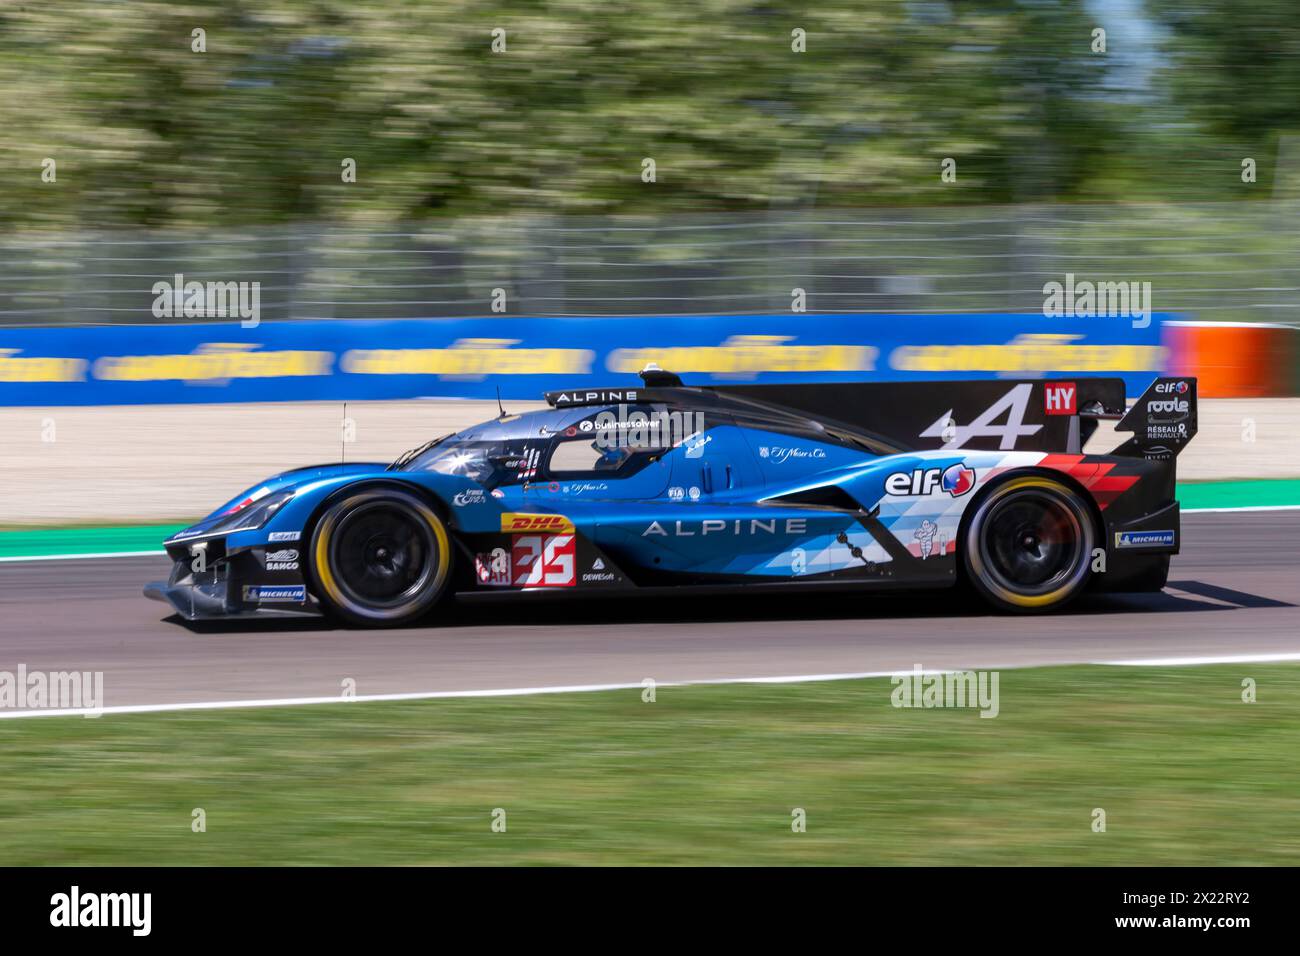 Imola, Italy. 19th Apr, 2024. ALPINE ENDURANCE TEAM (FRA), Alpine A424 - Paul-Loup Chatin (FRA), Ferdinand Habsburg-Lothringen (AUT), Charles Milesi (FRA) during the 6 Hours of Imola, 2nd round of the 2024 FIA World Endurance Championship, at International Circuit Enzo and Dino Ferrari, Imola, Italy on April 19, 2024 during WEC - 6 Hours of Imola, Endurance race in Imola, Italy, April 19 2024 Credit: Independent Photo Agency/Alamy Live News Stock Photo